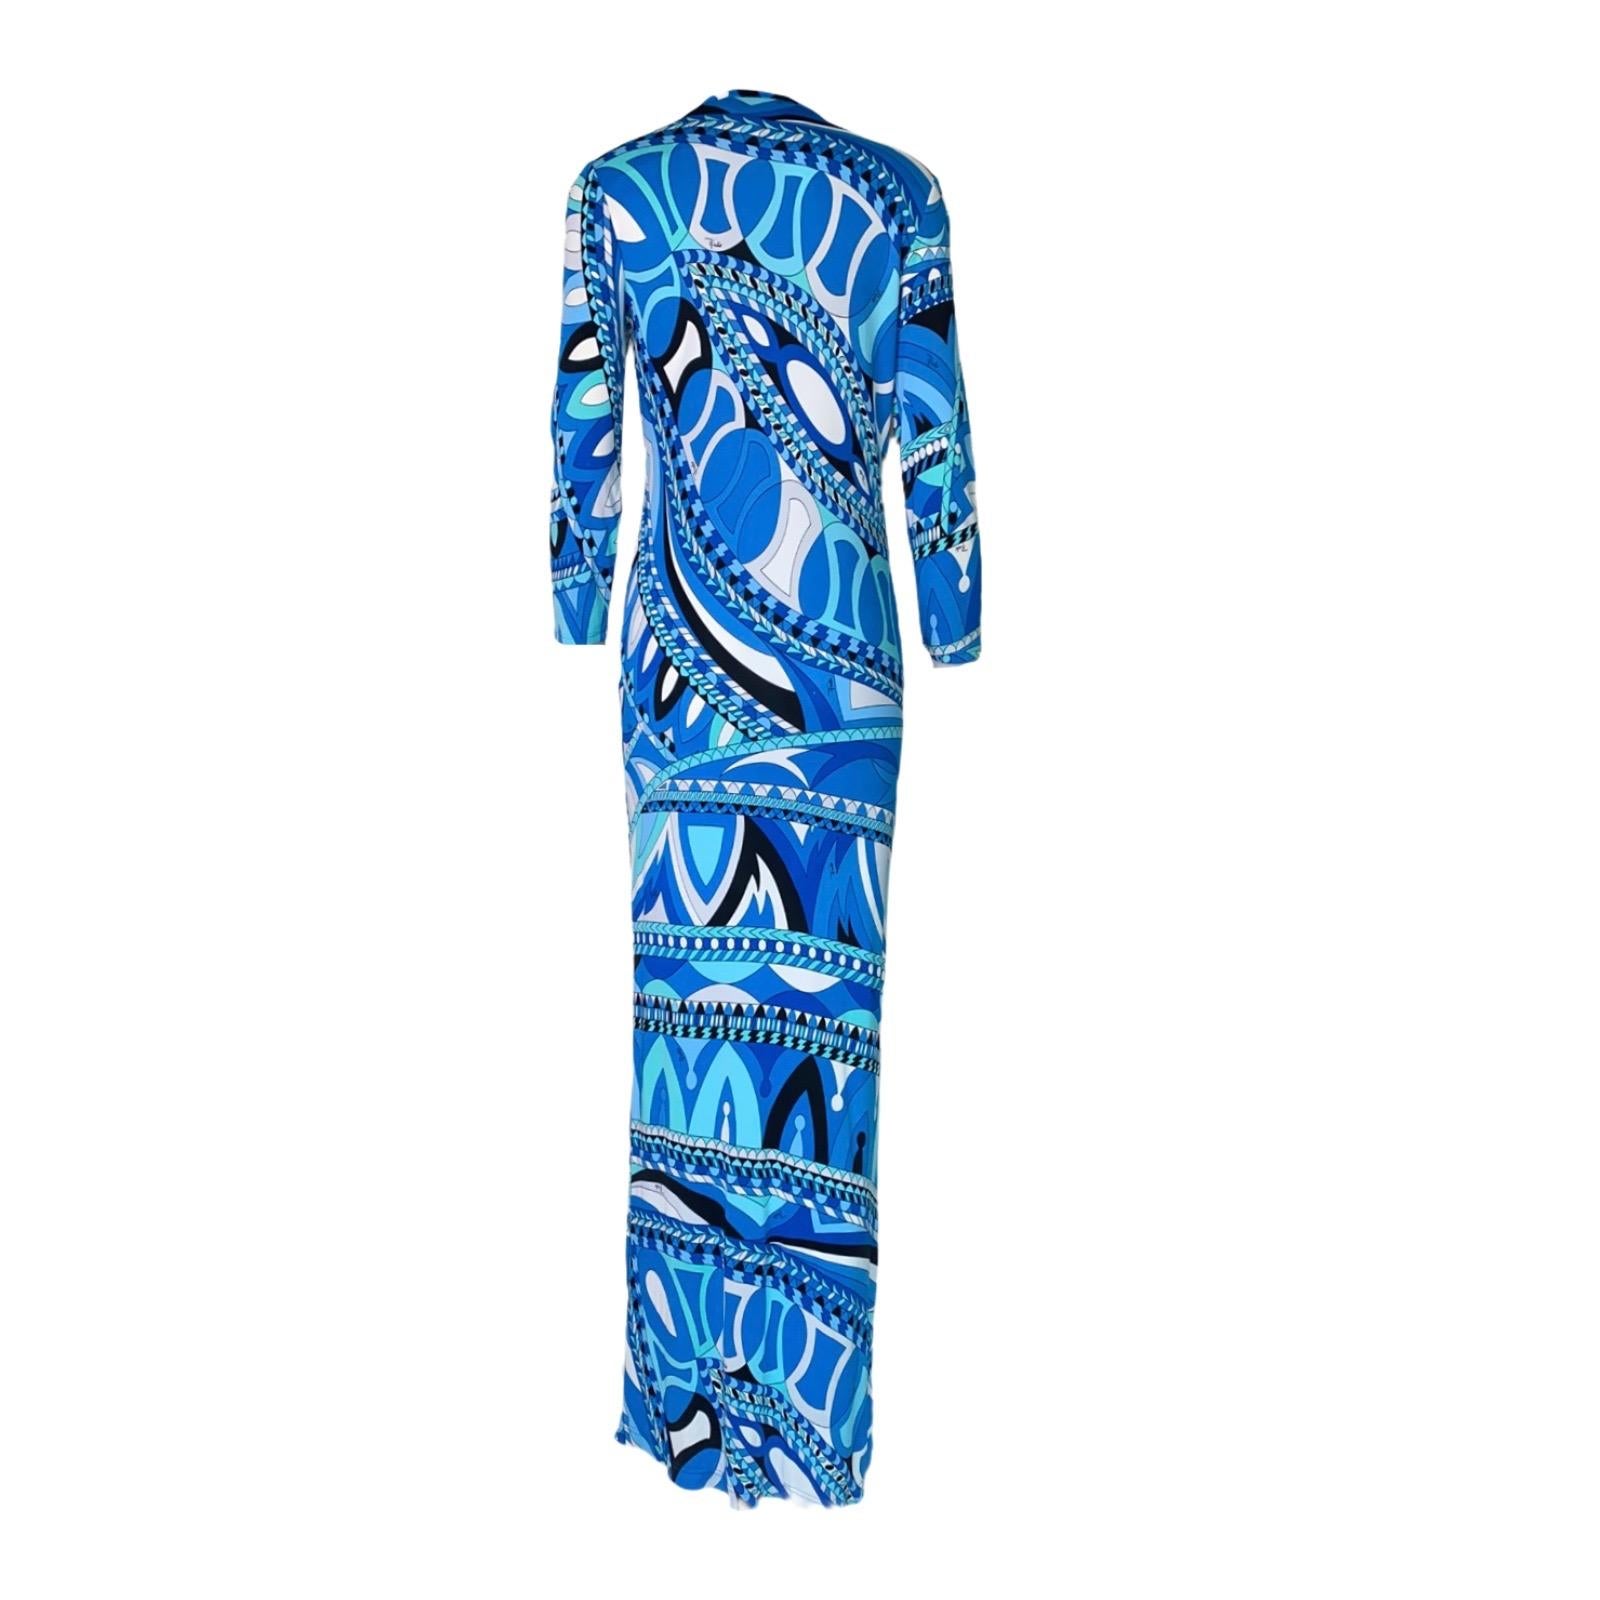 Blue NEW Emilio Pucci Embroidered Signature Print Embellished Tunic Maxi Dress Gown